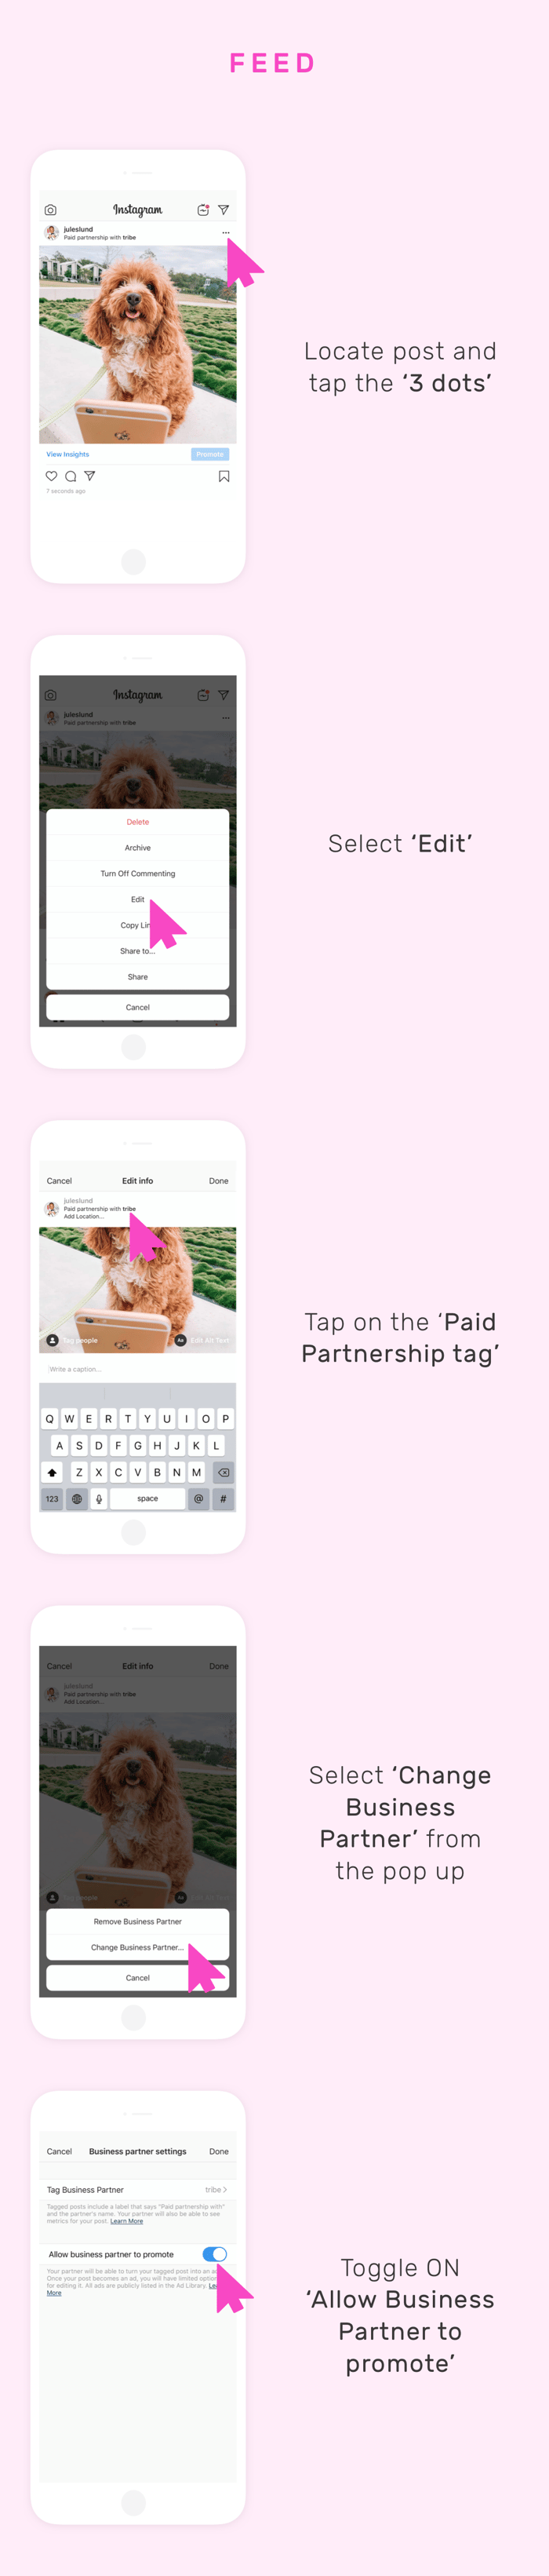 allowing a brand to promote your feed post